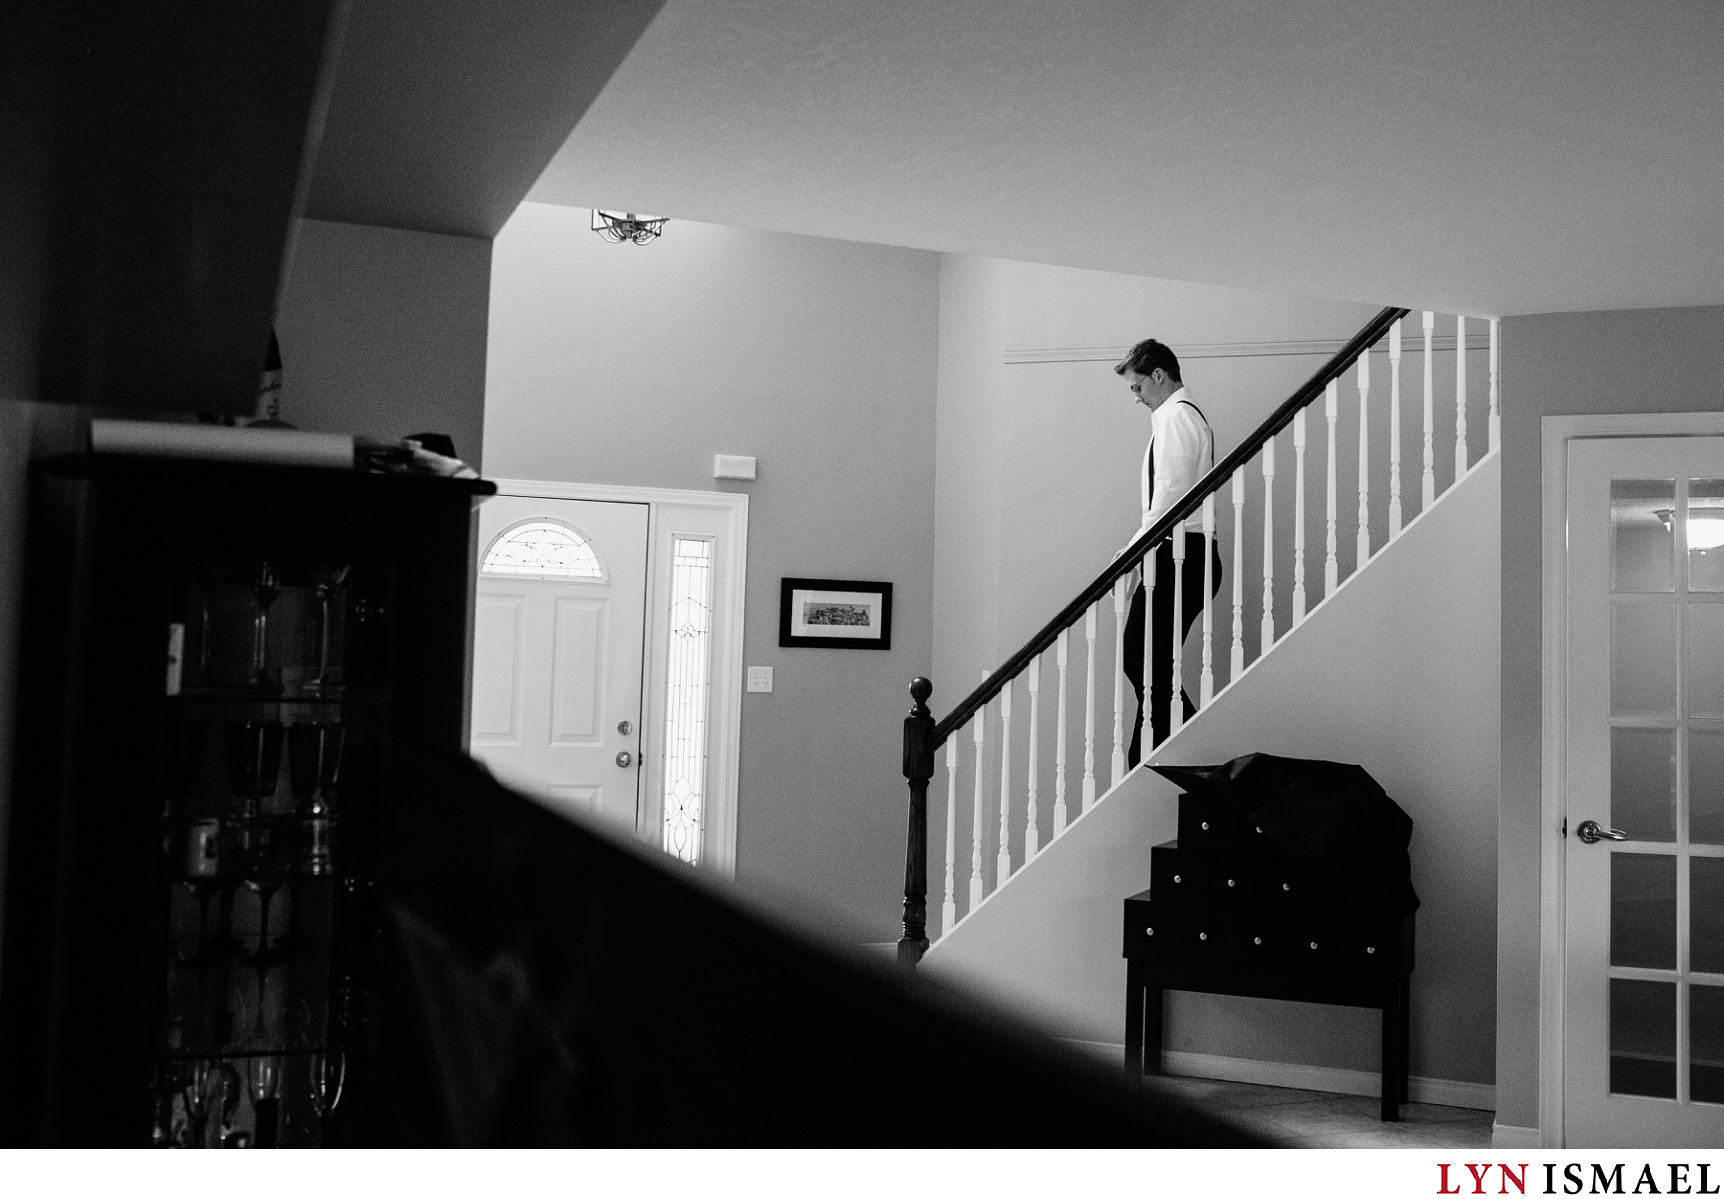 Groom climbs down the staircase from the second level of their home.